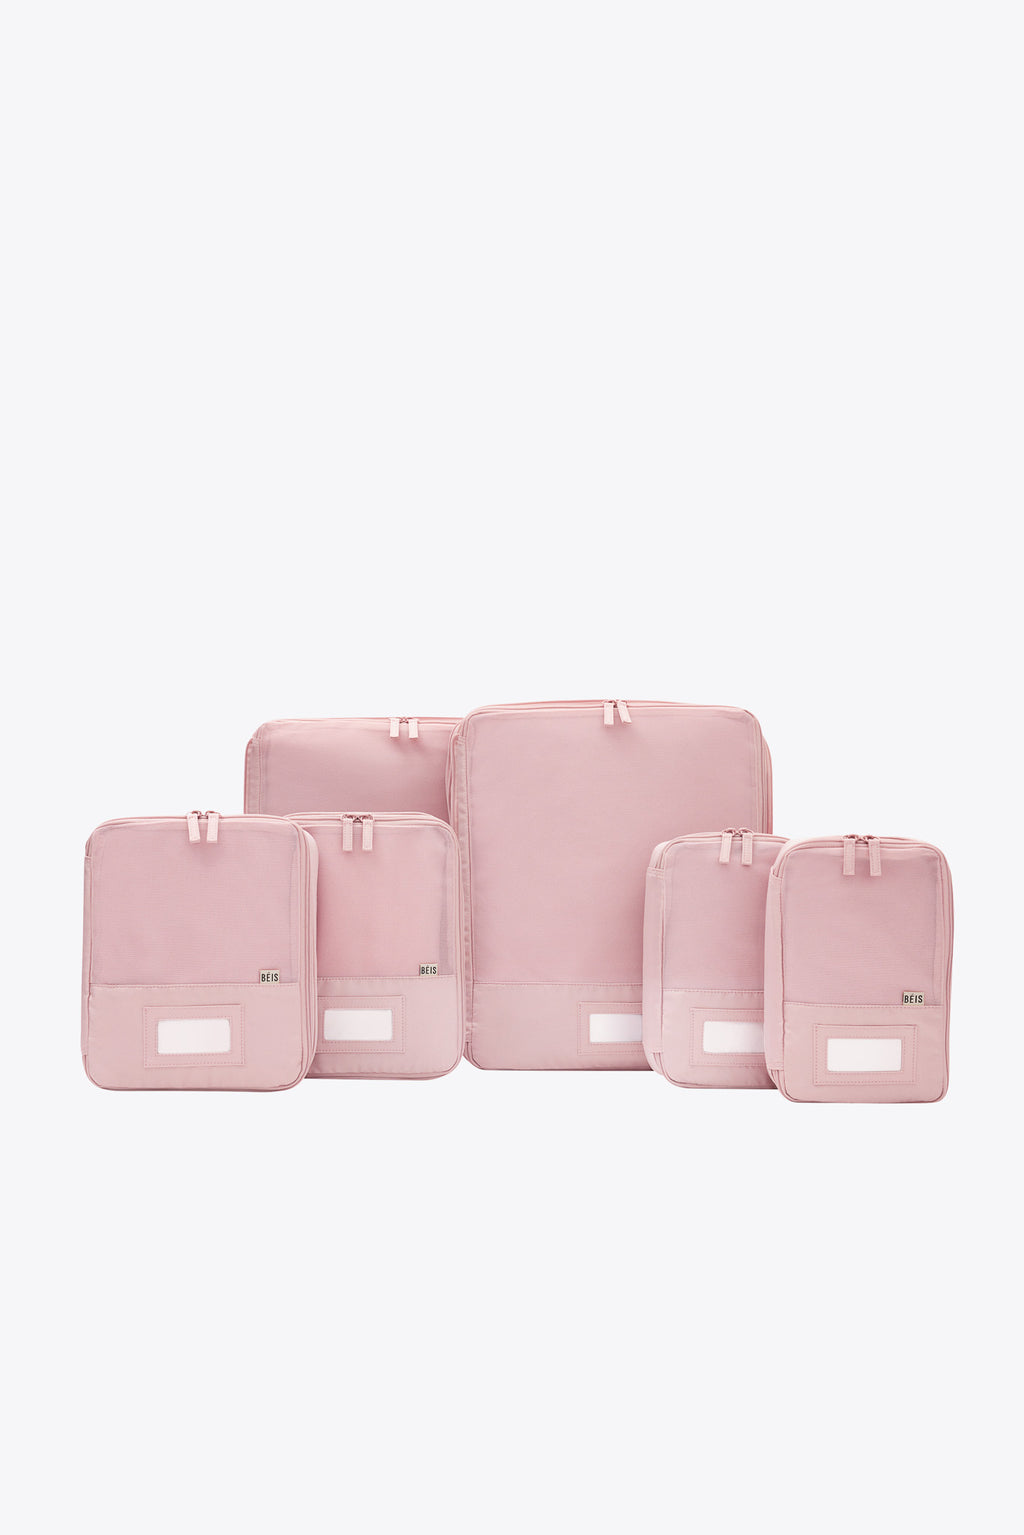 BÉIS 'The Compression Packing Cubes 6 pc' in Atlas Pink - 6 Piece